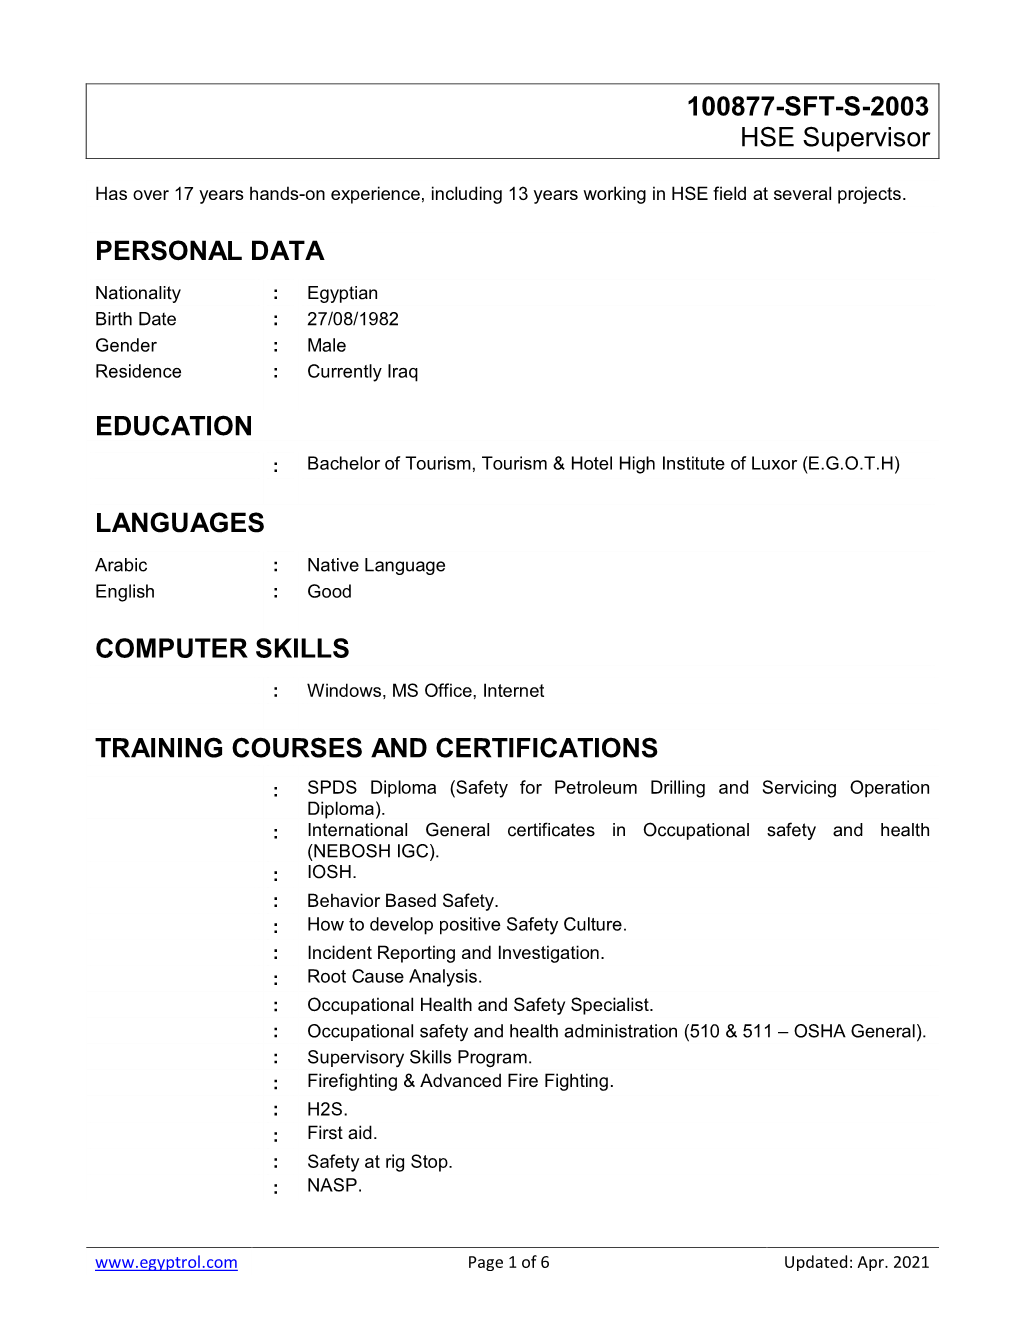 100877-SFT-S-2003 HSE Supervisor PERSONAL DATA